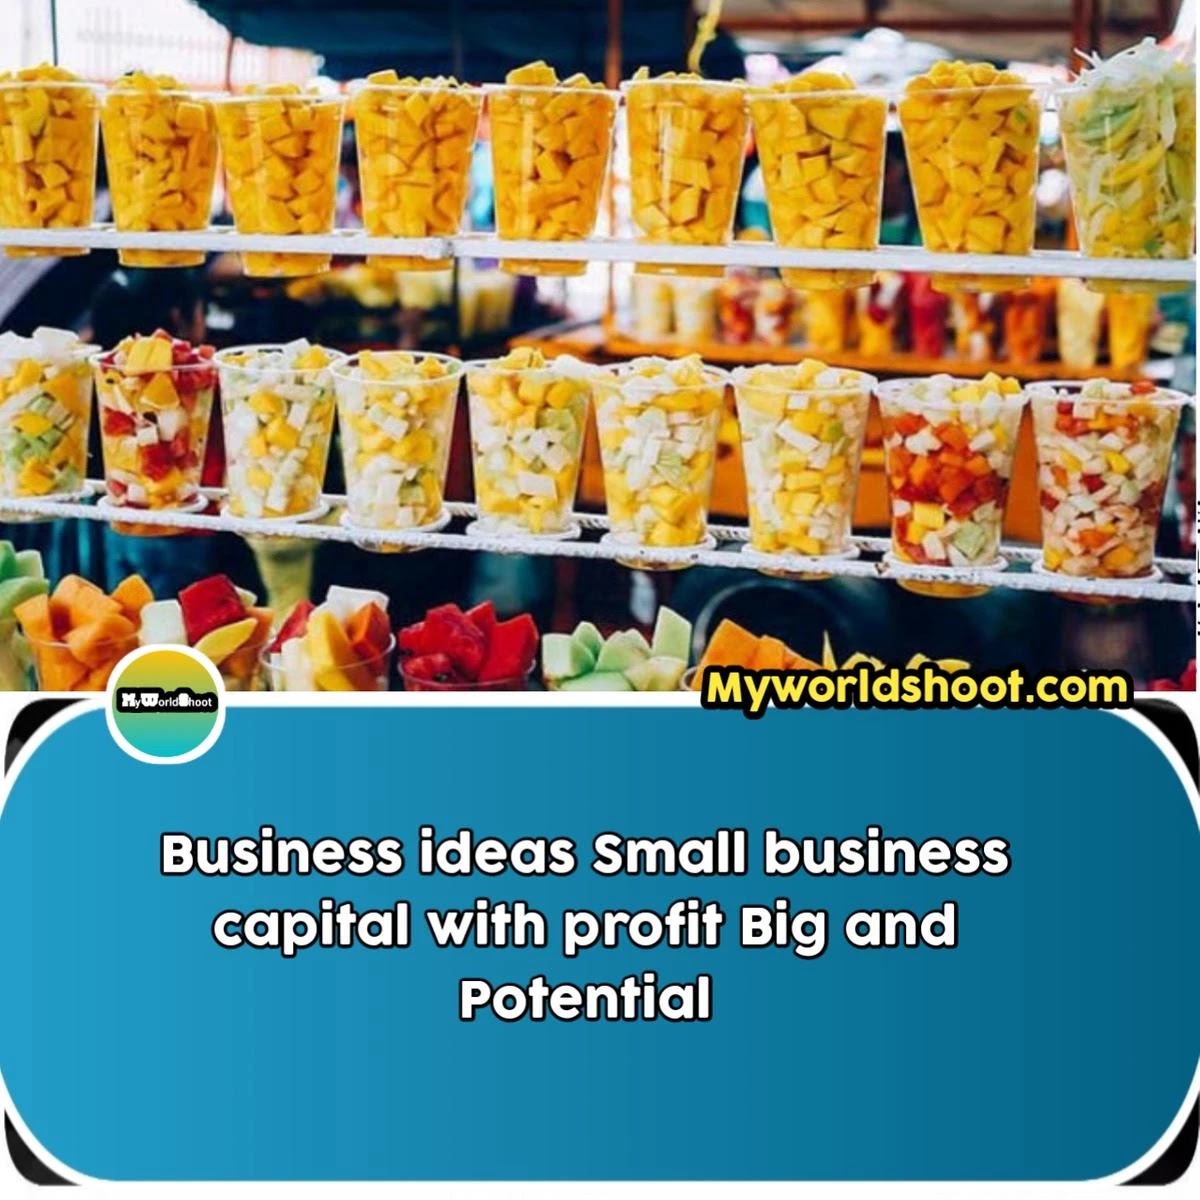 Business-ideas-Small-business-capital-with-profit-Big-and-Potential